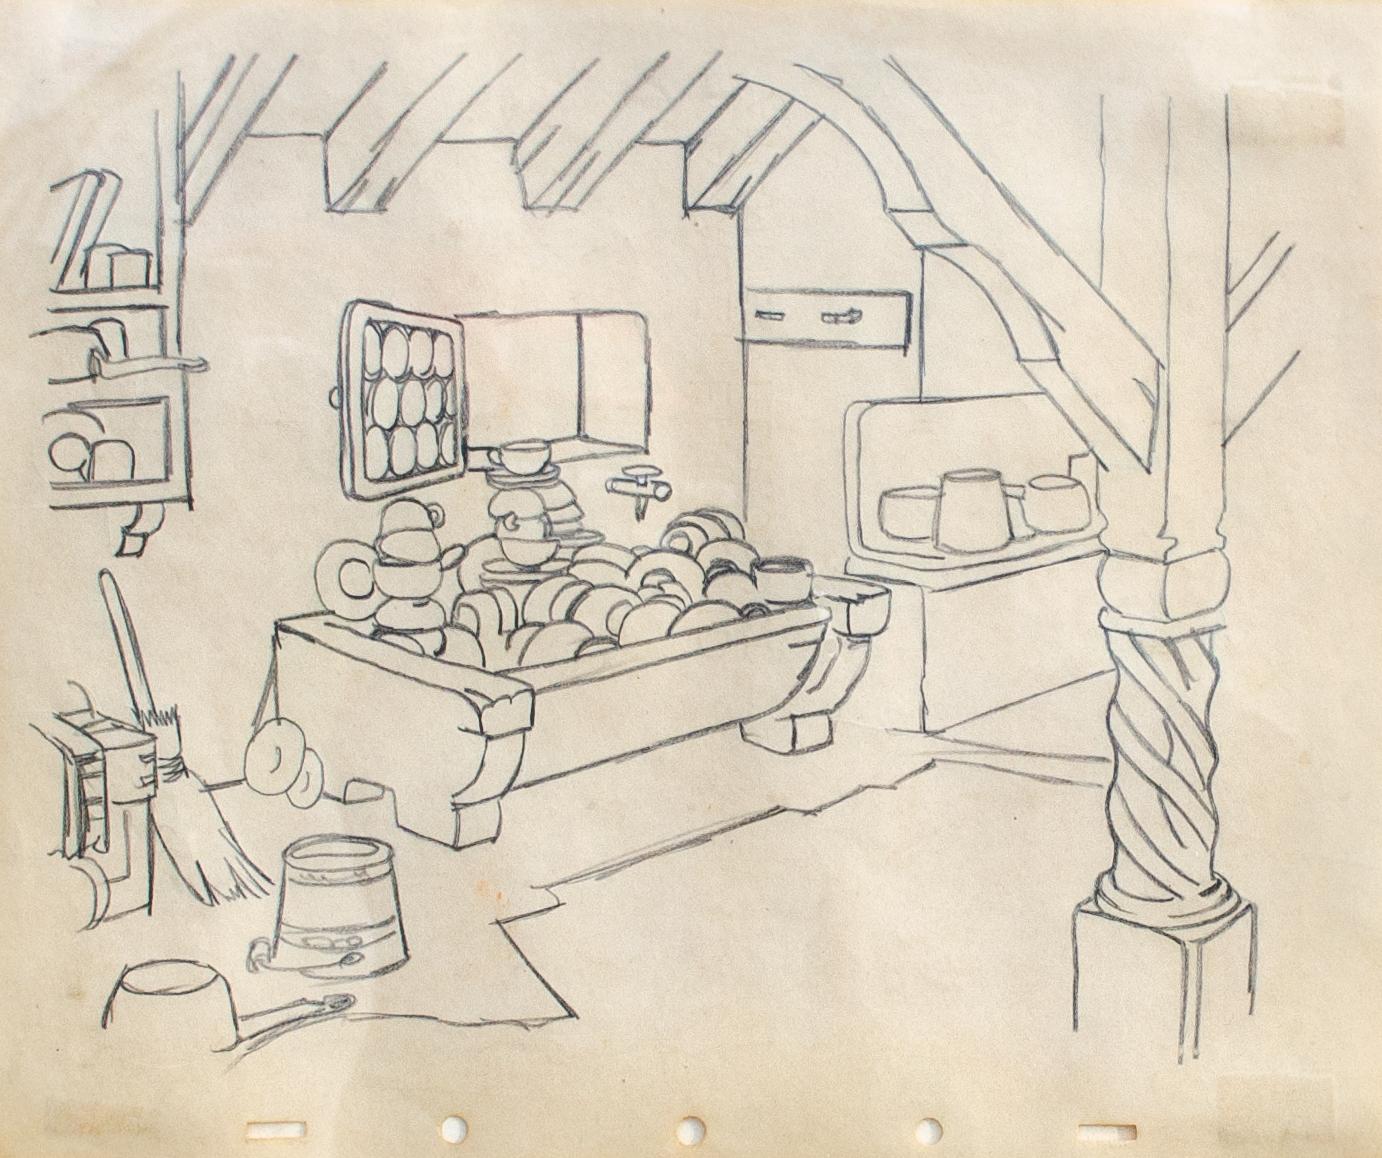 Unknown American Modernism School
Untitled (Kitchen), c. 1930
Pencil on paper
Sight size: 10 x 12 in. 
Framed: 16 3/4 x 20 3/4 in.
